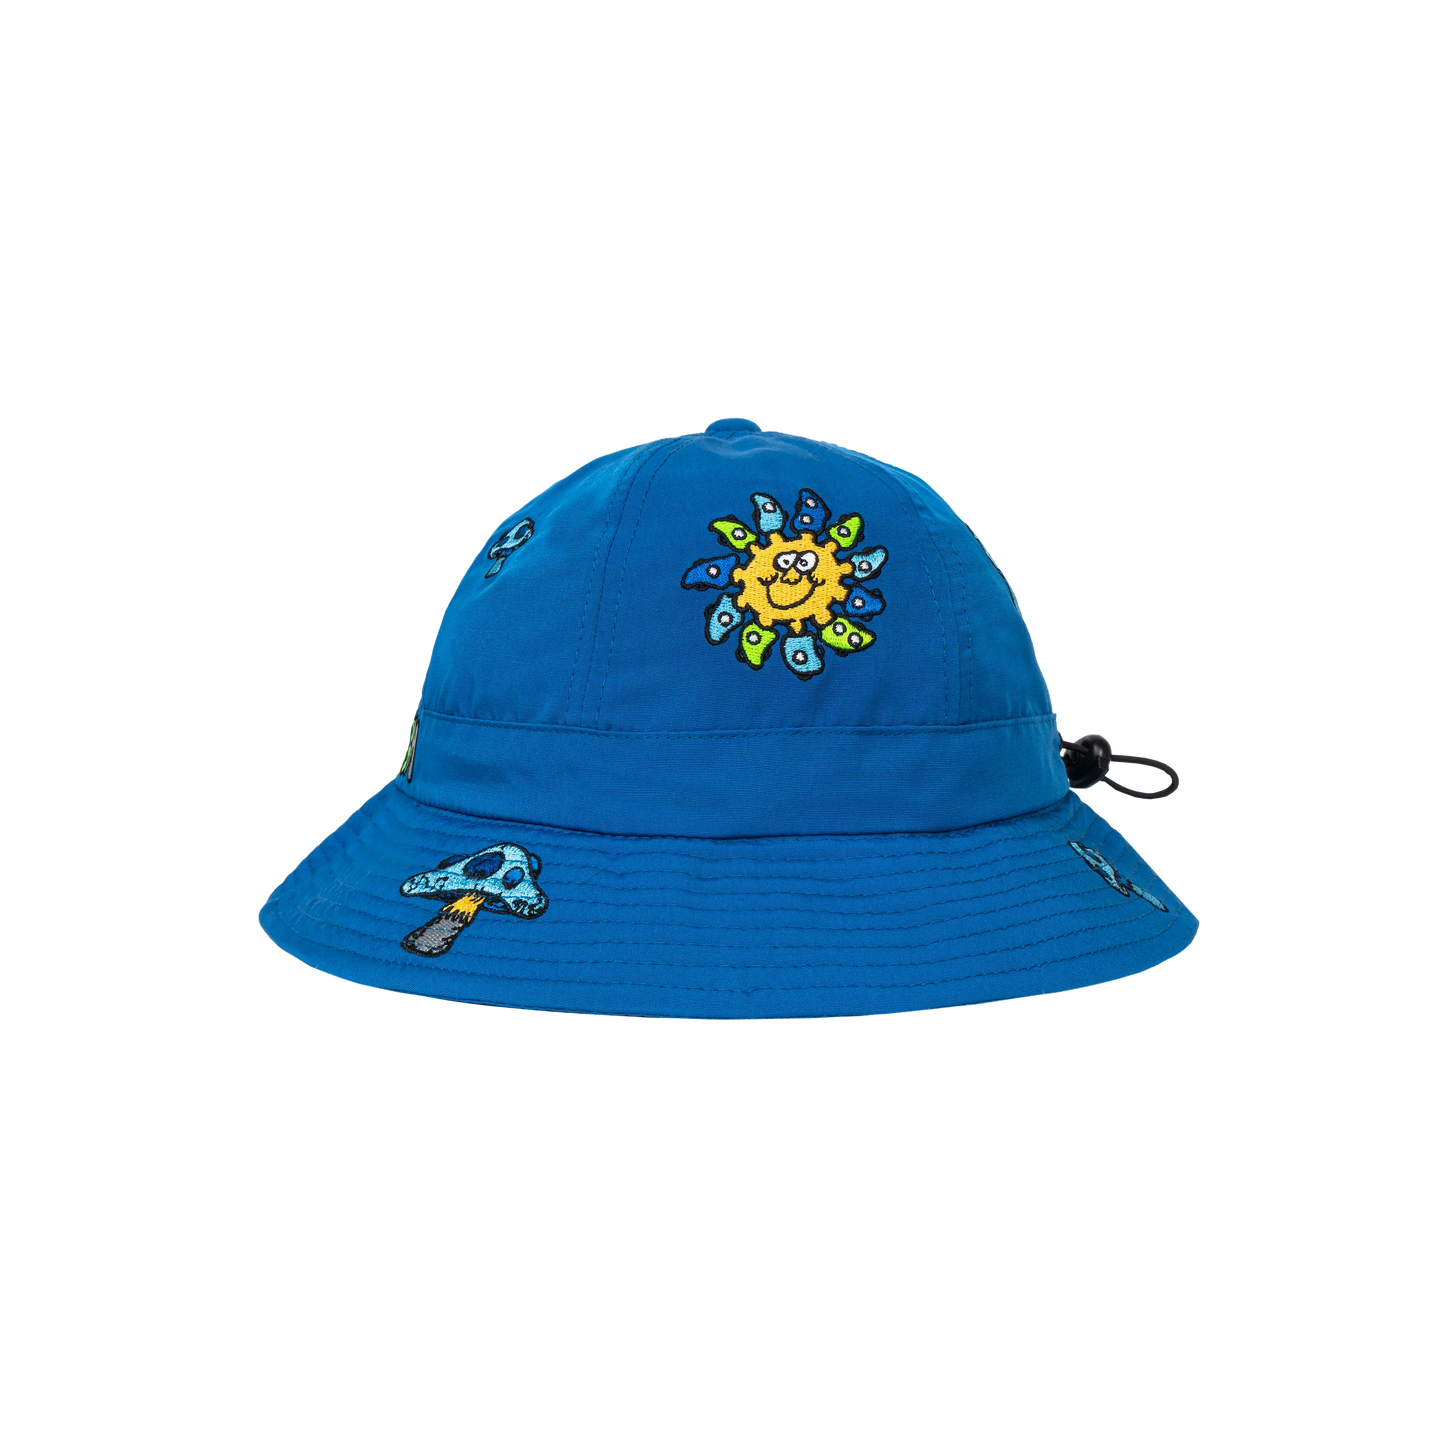 Real Bad Man Delic Embroidered Bel BucketHat Blue